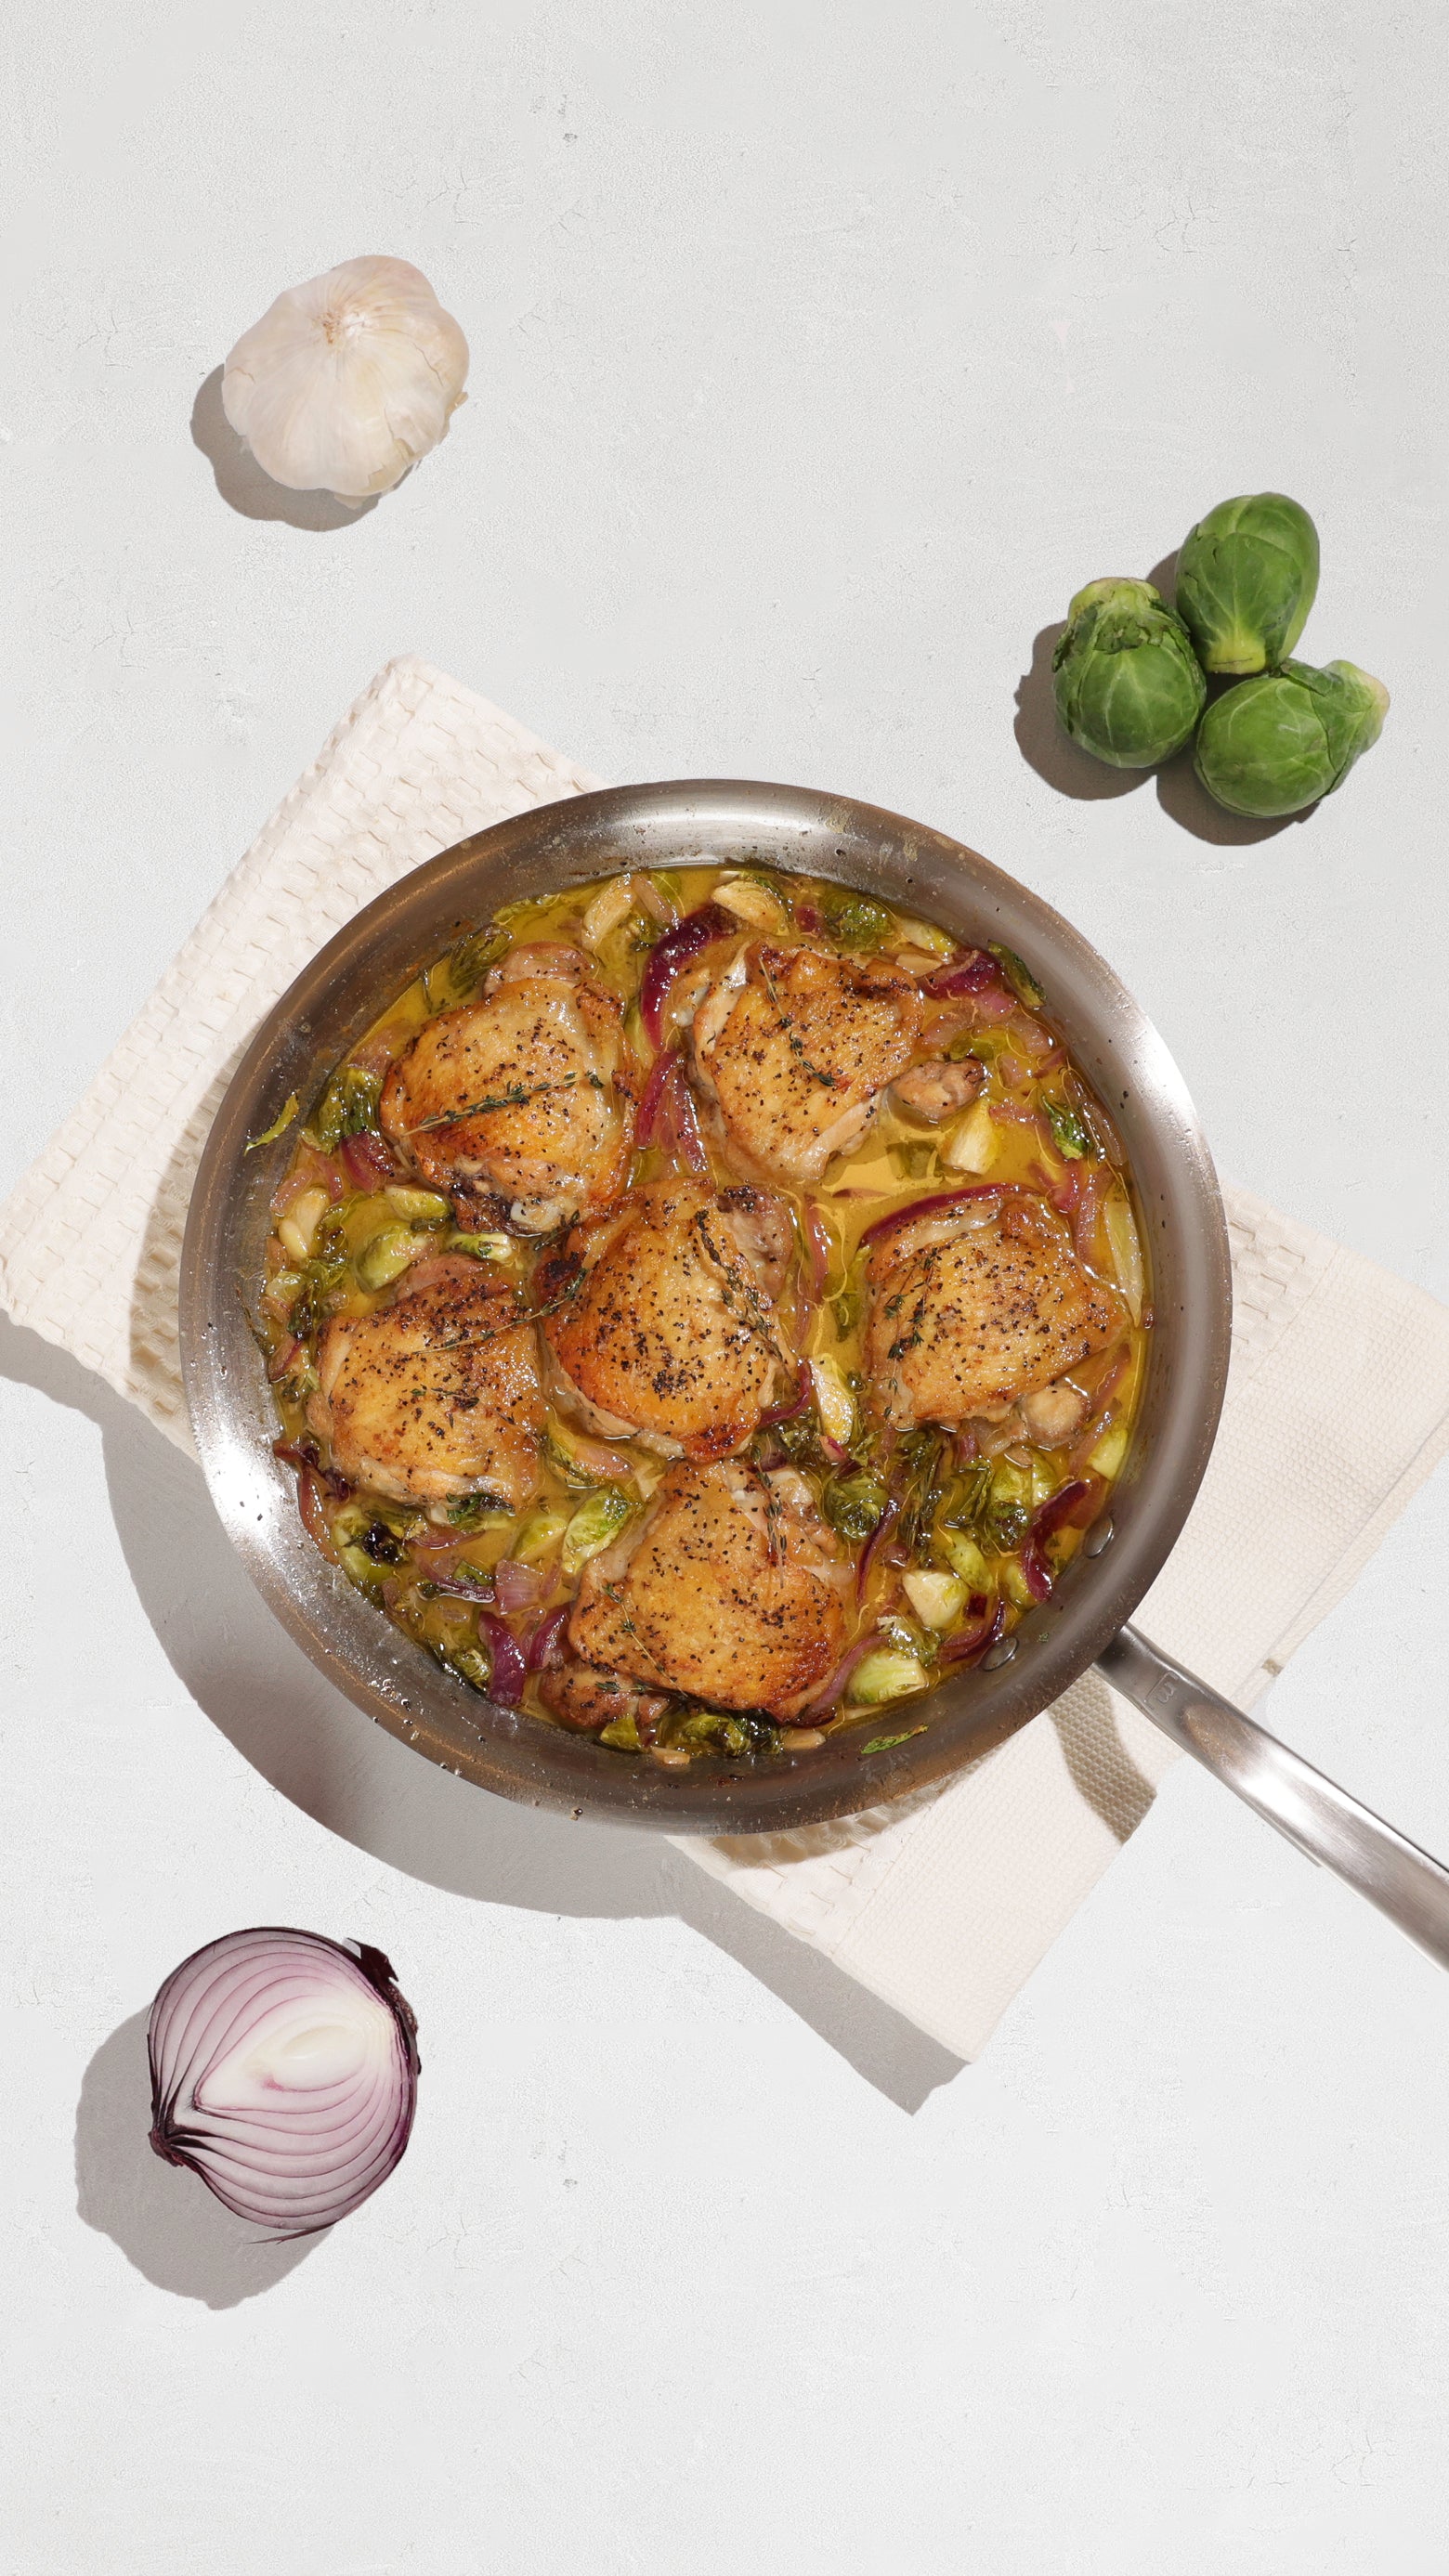 Apple Cider Glazed Chicken Thighs with Brussel Sprouts